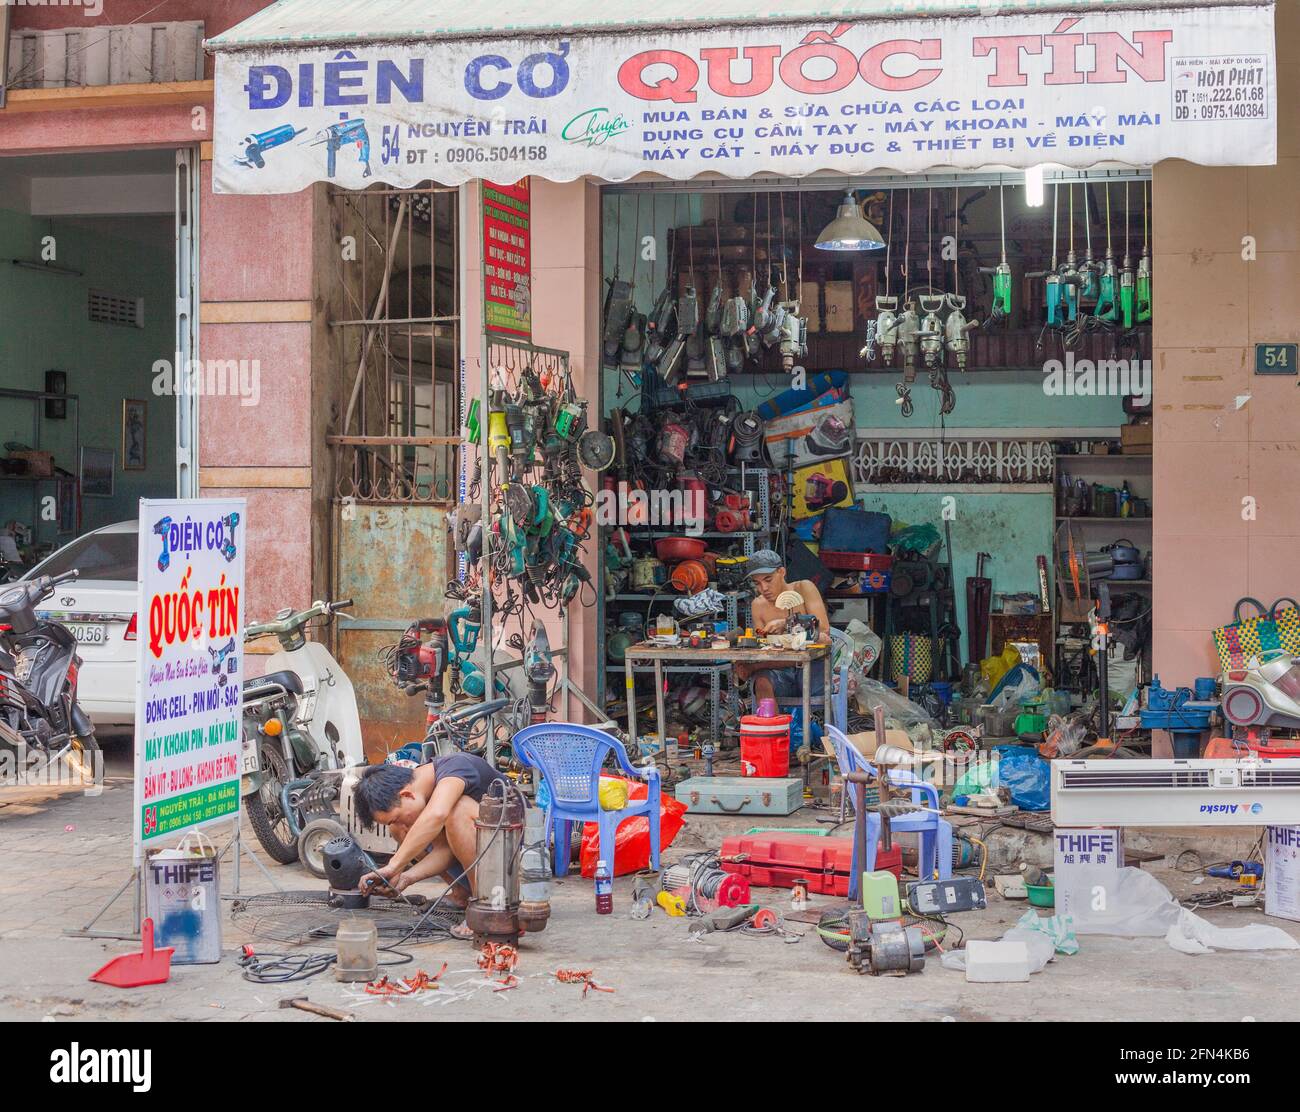 Two Vietnamese engineers working on machinery at their messy pavement workshop, Da Nang, Vietnam Stock Photo